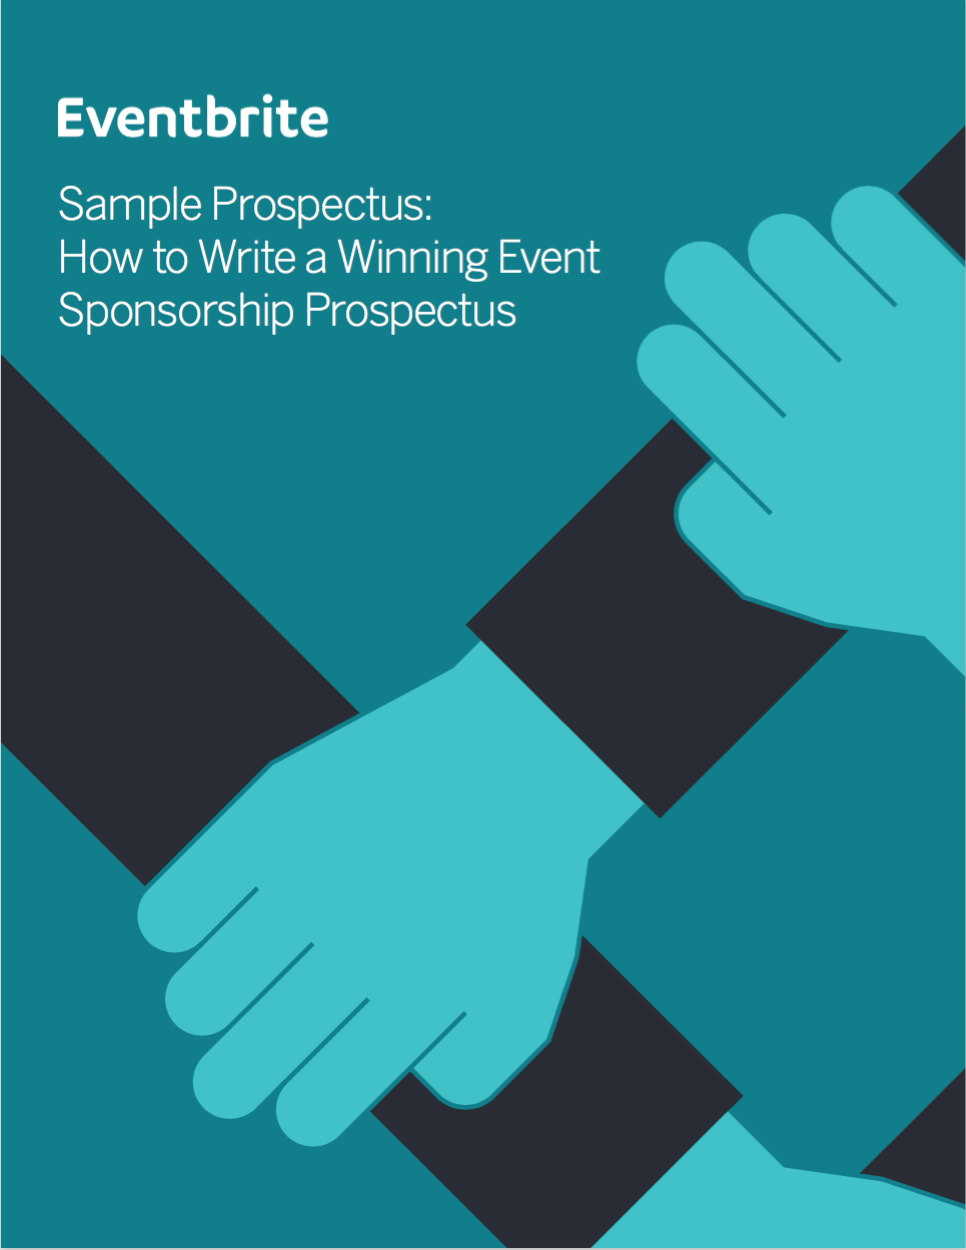 A Template for Writing an Event Sponsorship Prospectus - Eventbrite